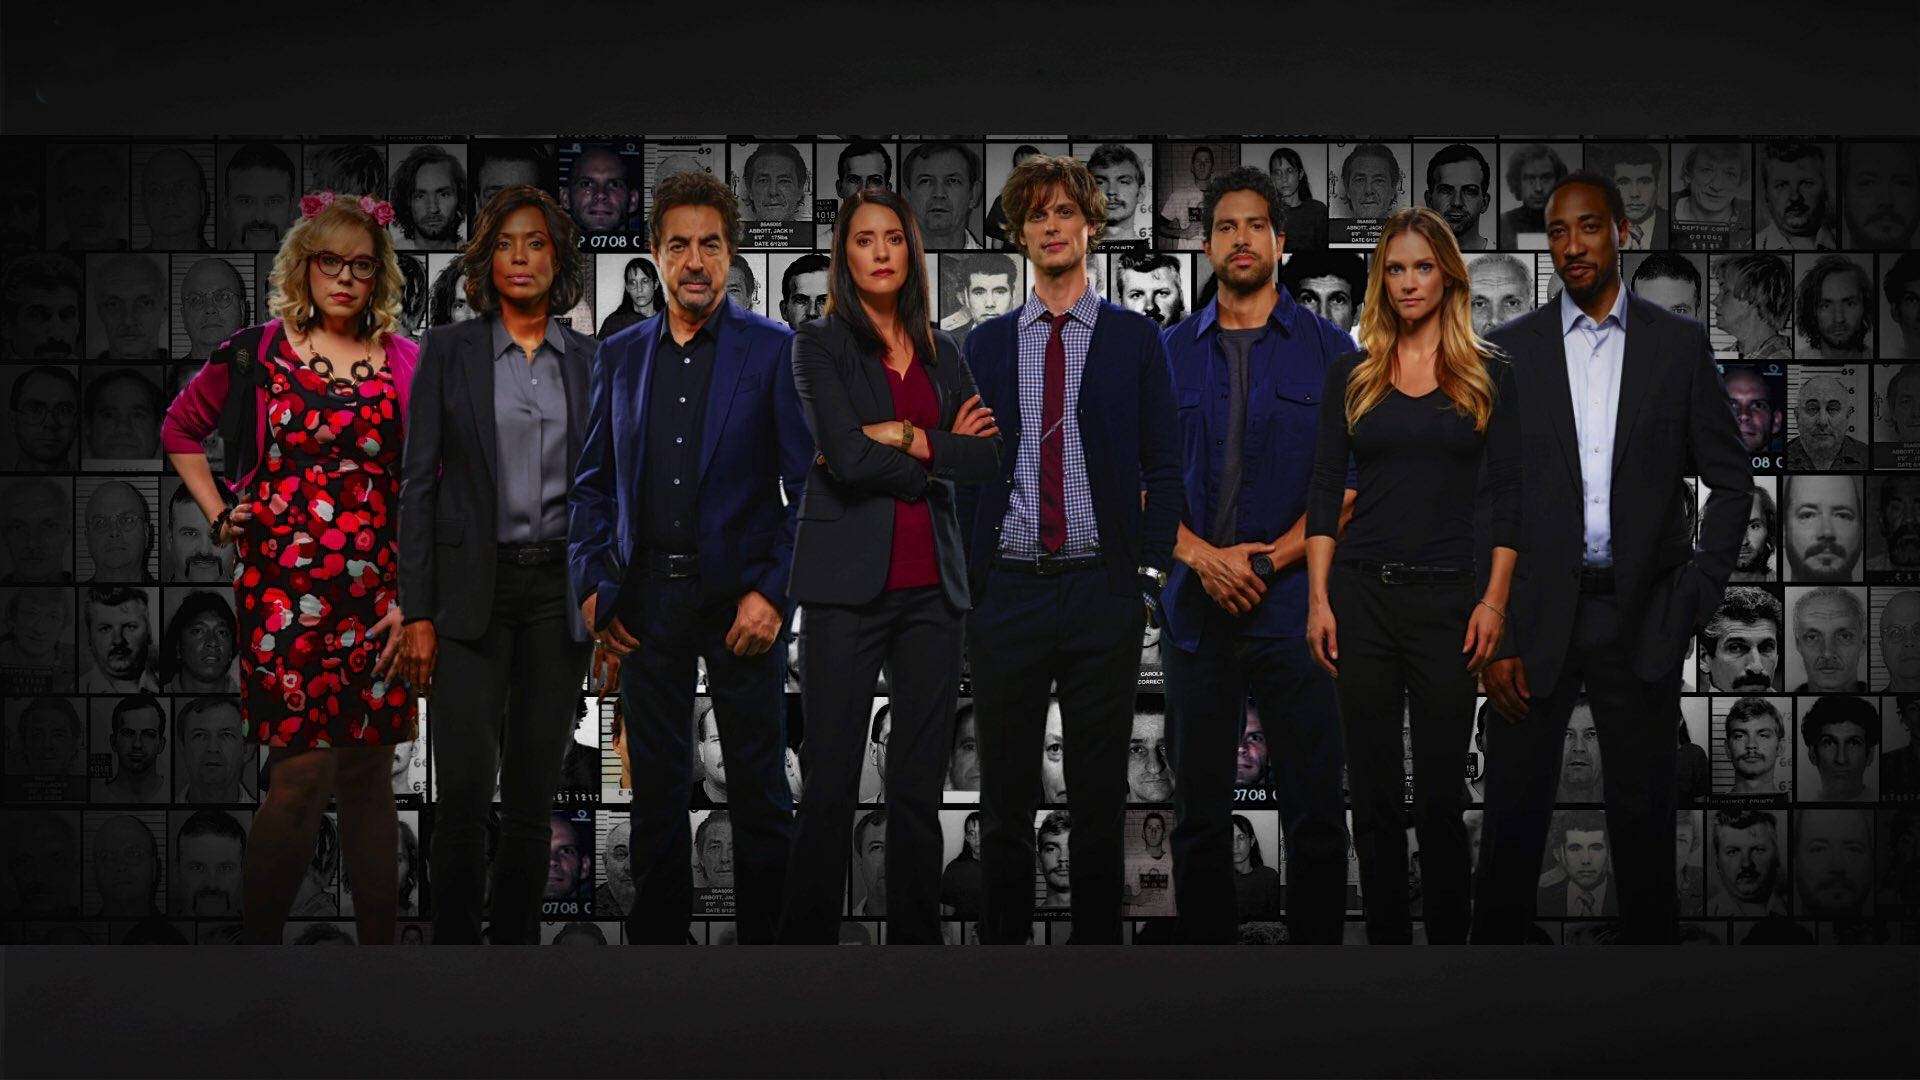 The Ensemble Cast Of Criminal Minds Season 14 In Action. Background